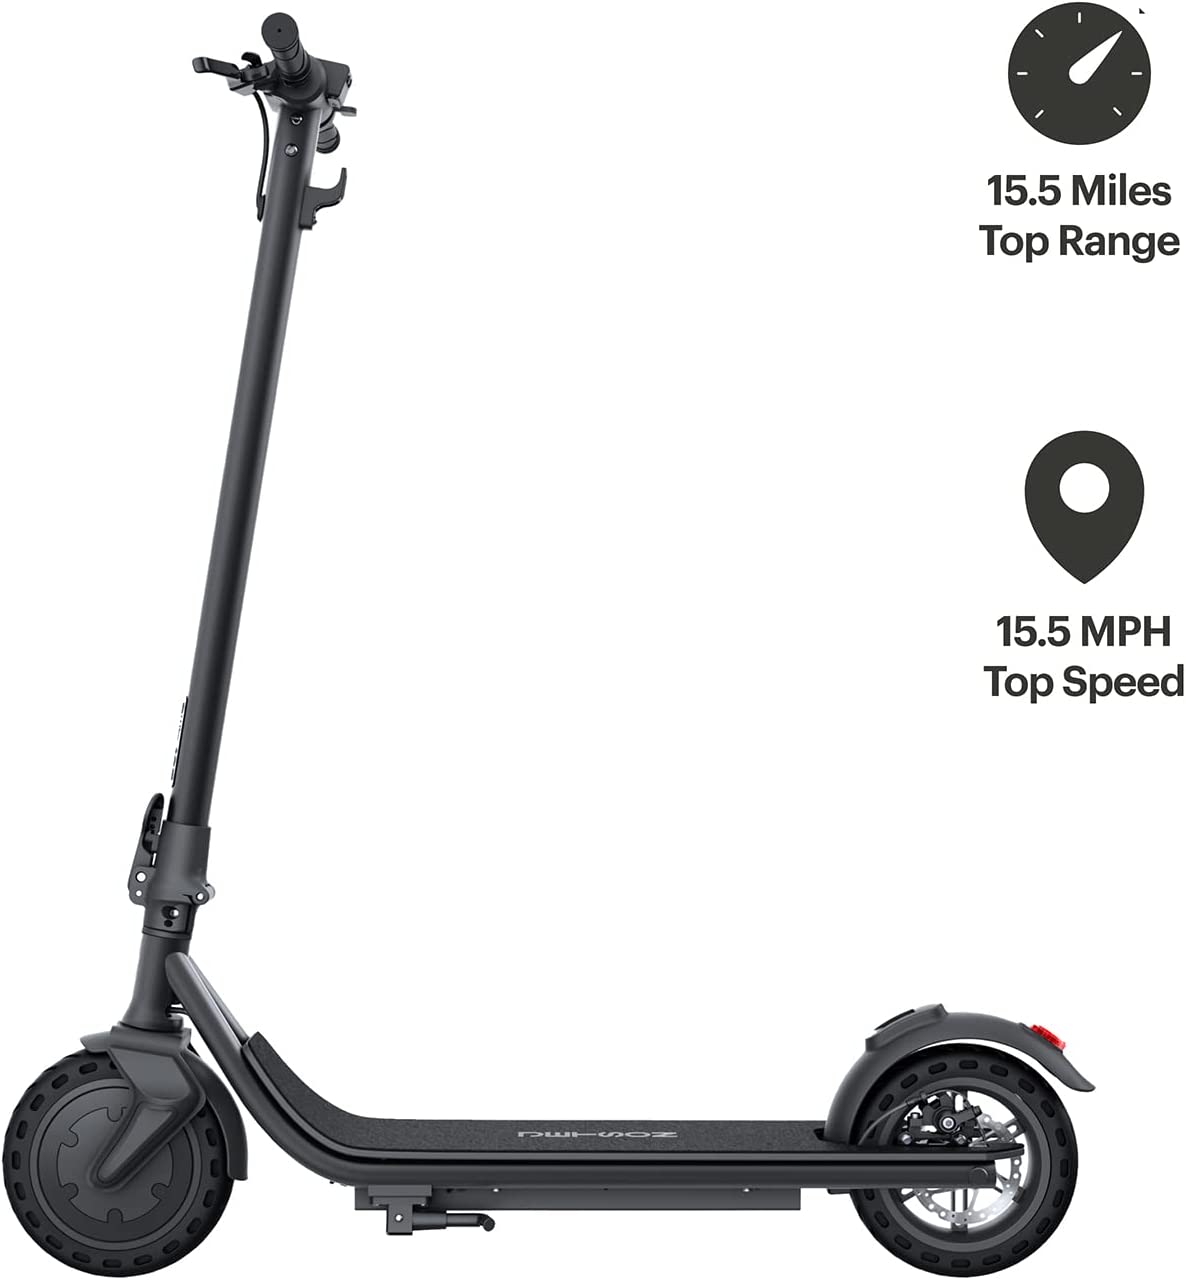 Jetson Racer Up To 16 Mile Range 15 MPH 8.5" Tires 250W Foldable Electric Scooter New